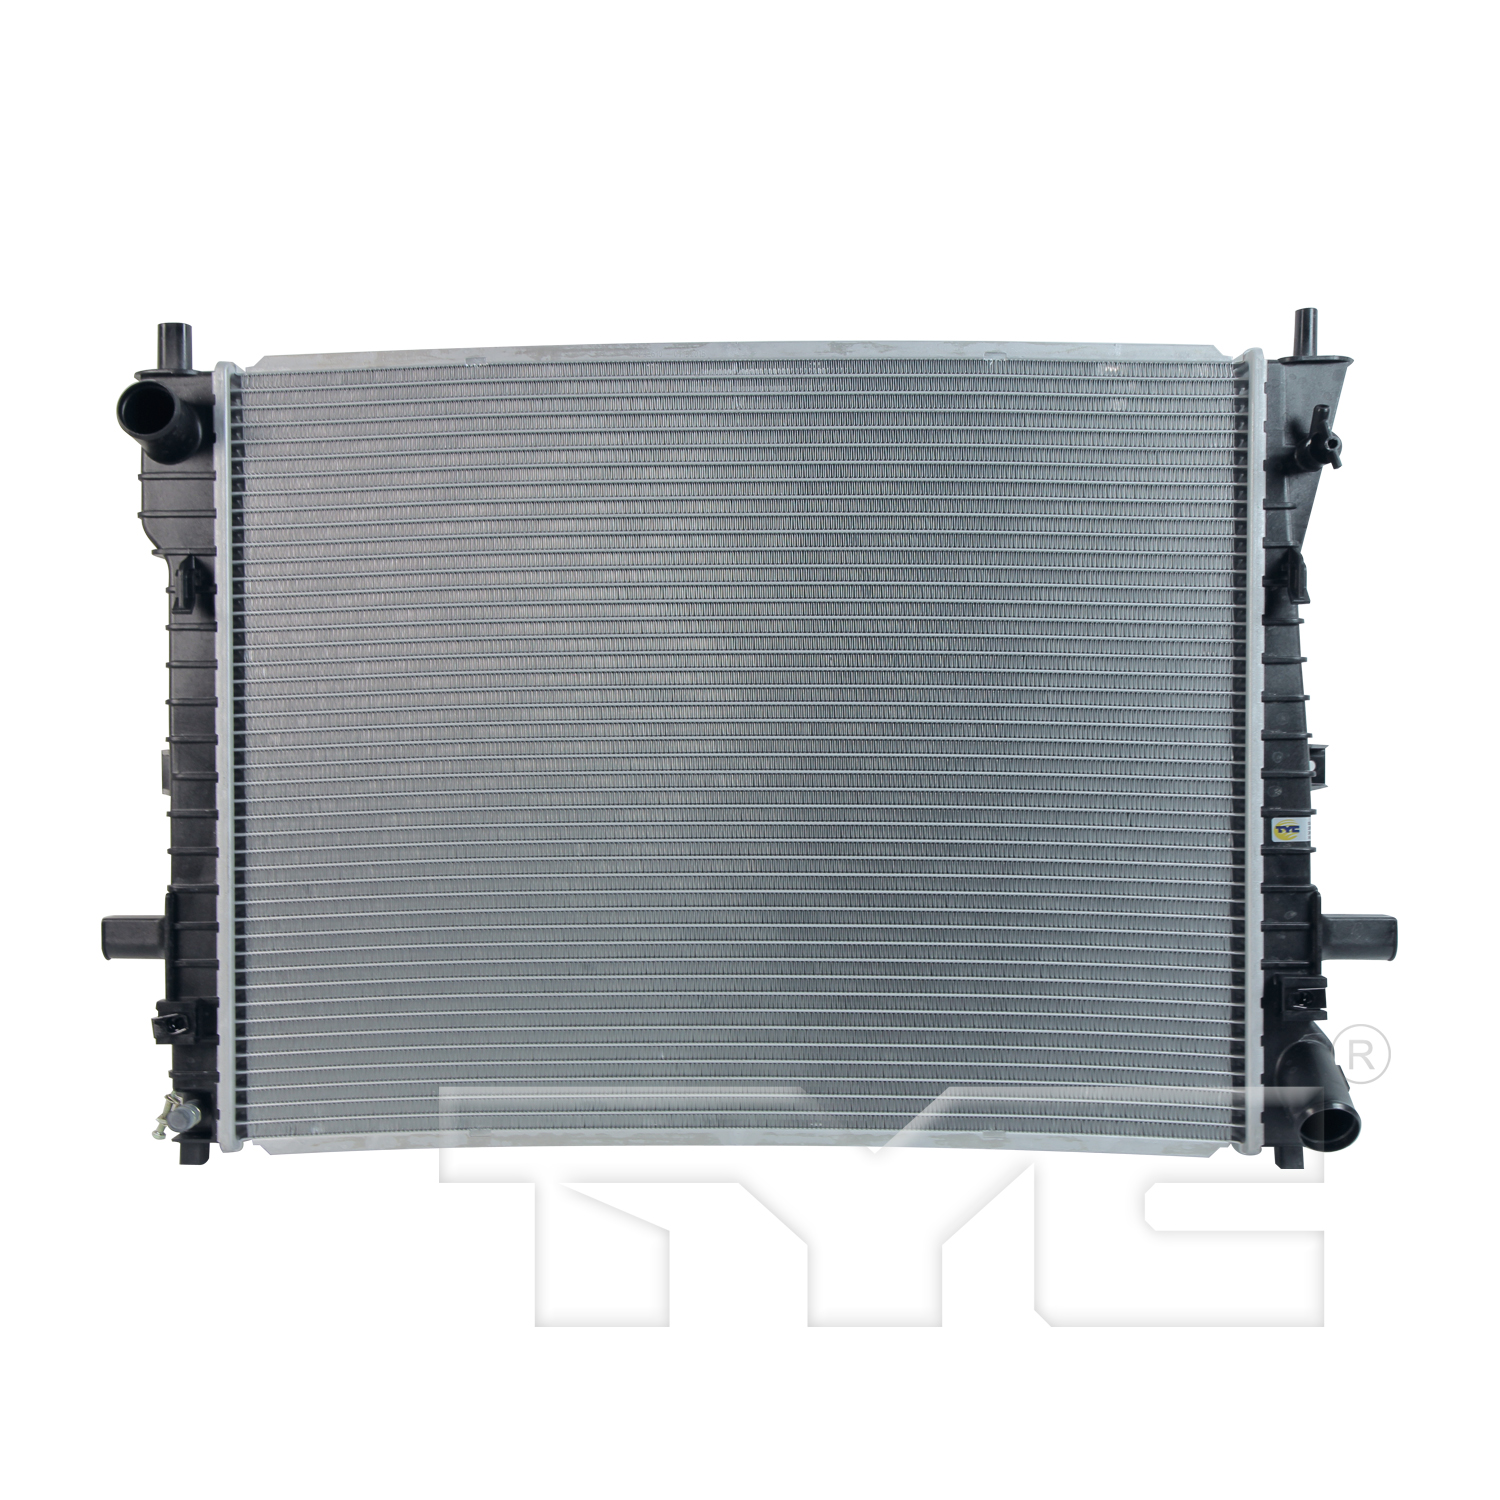 Aftermarket RADIATORS for MERCURY - GRAND MARQUIS, GRAND MARQUIS,03-05,Radiator assembly